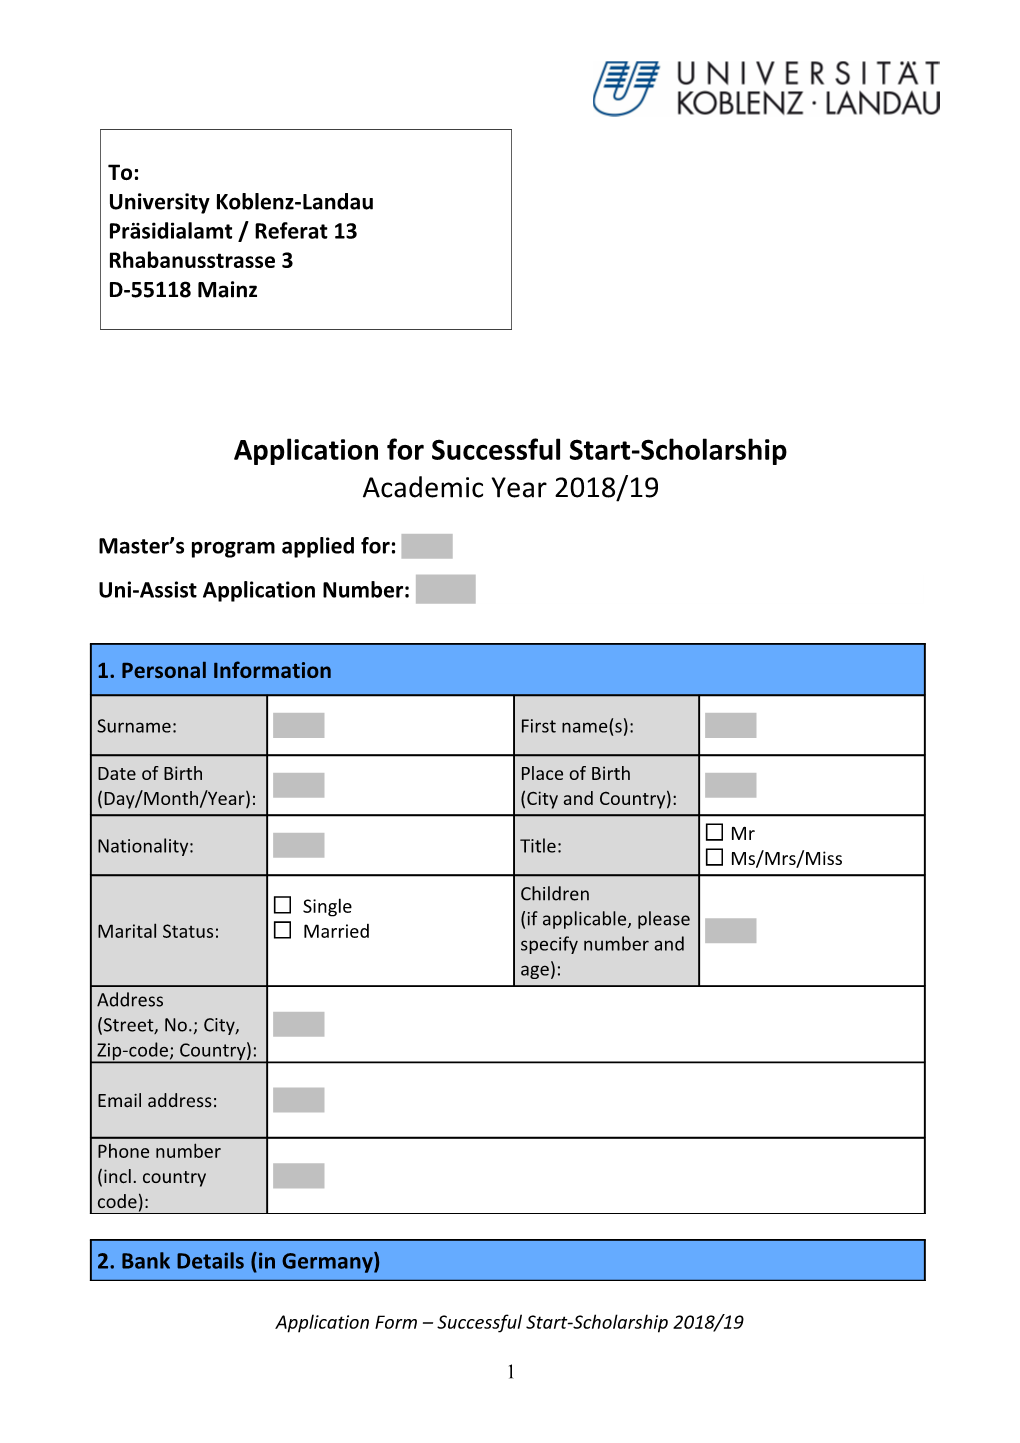 Application for Successful Start-Scholarship